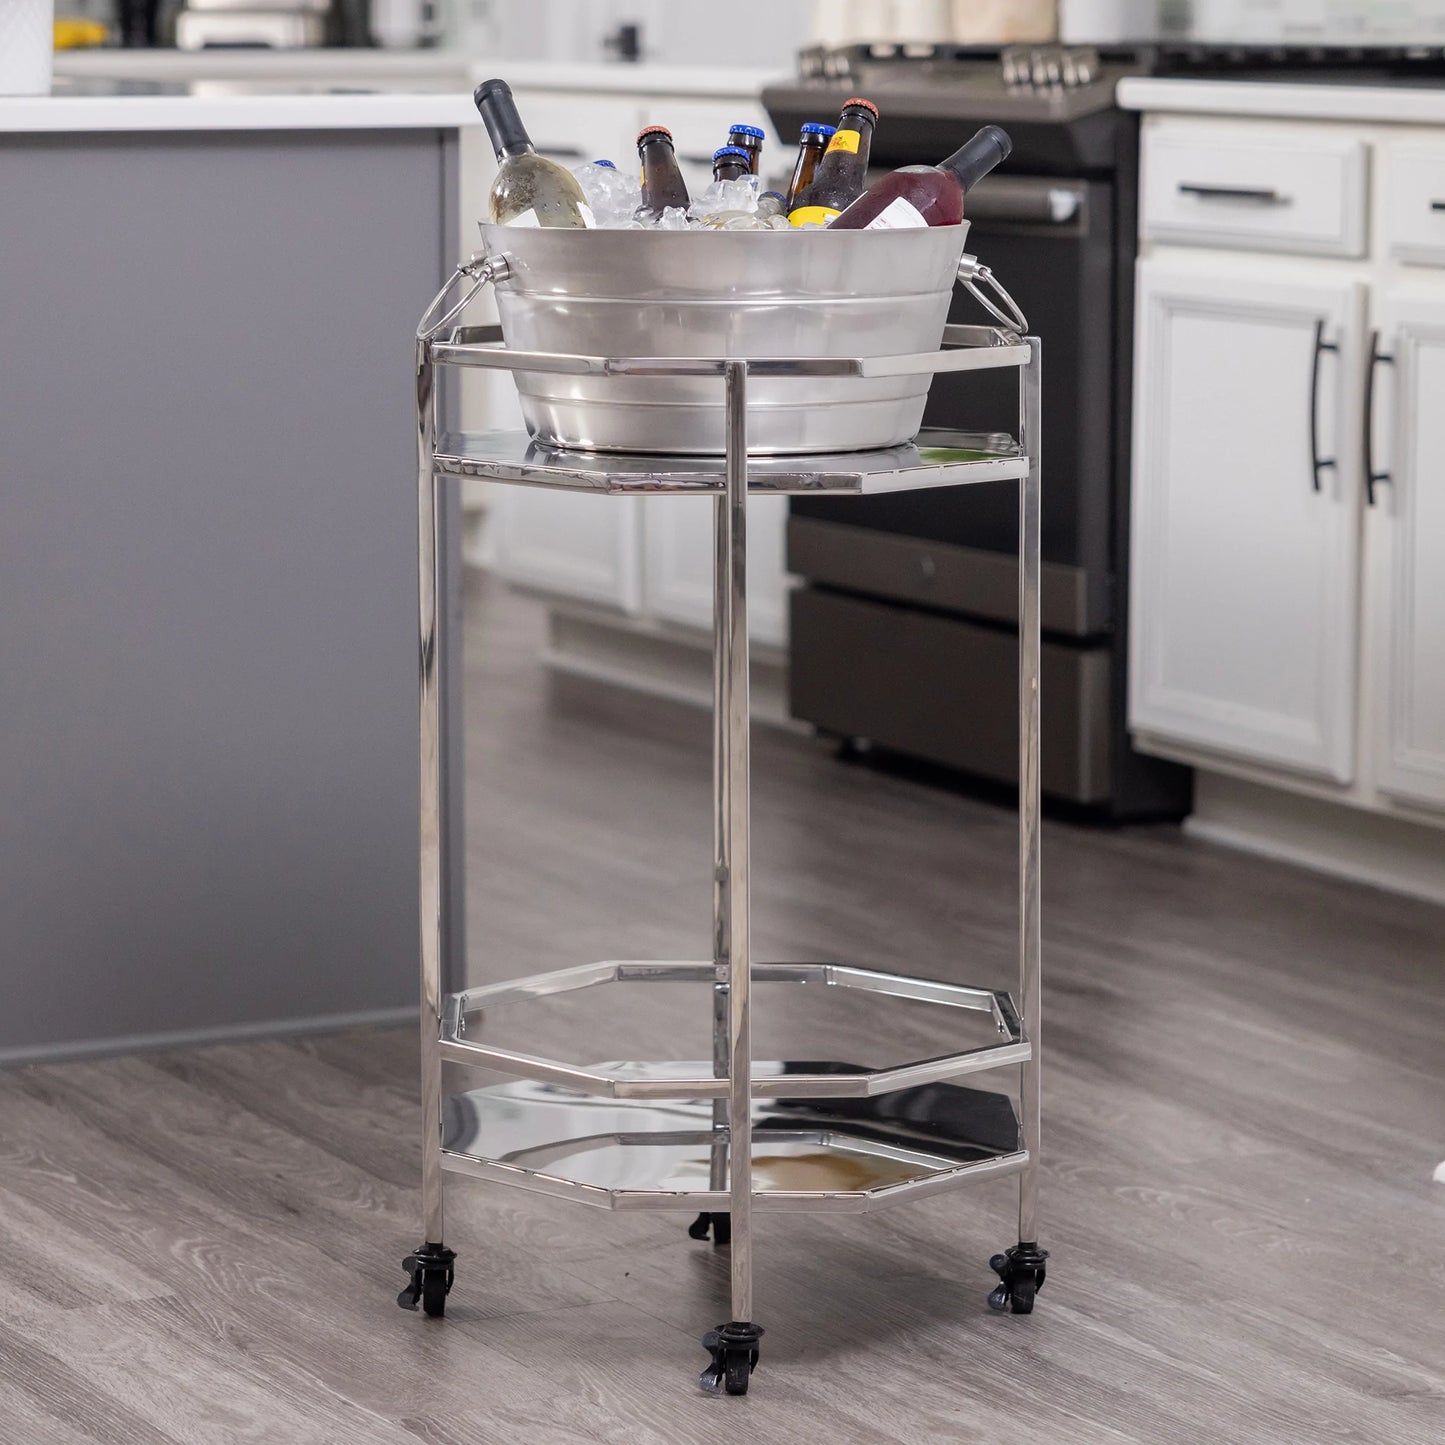 Metal rolling cooler bar cart with shelves and insulated to chill wine and drinks for parties.  Use in the kitchen, bar, dining room, or on the patio.  